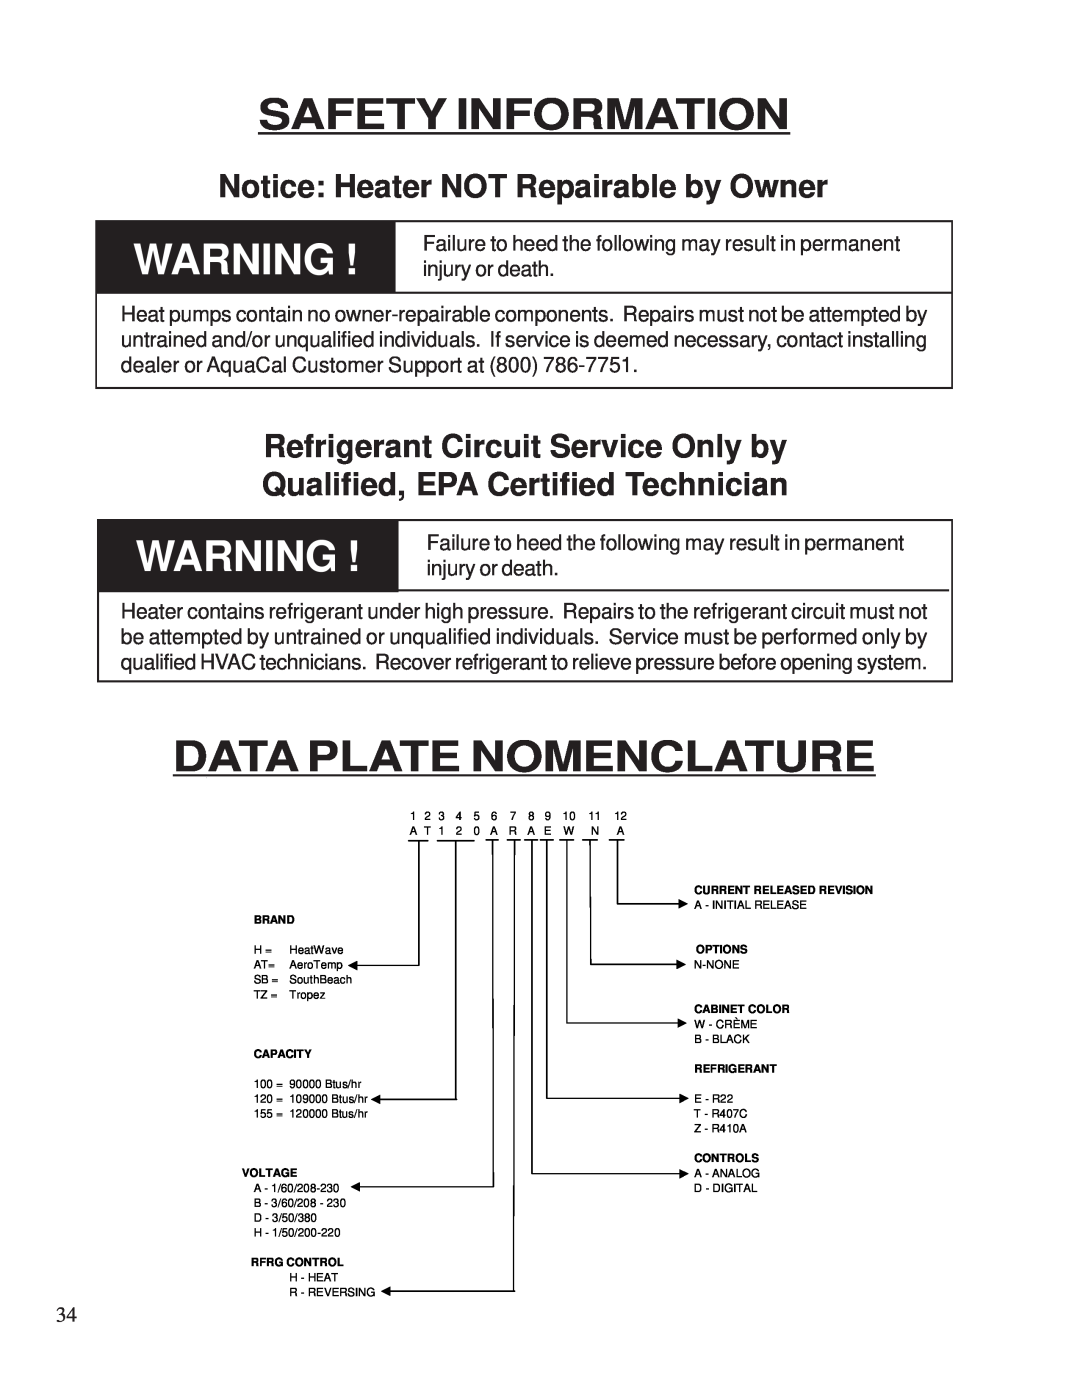 Aquacal 100 owner manual Data Plate Nomenclature, Safety Information, Notice Heater NOT Repairable by Owner 